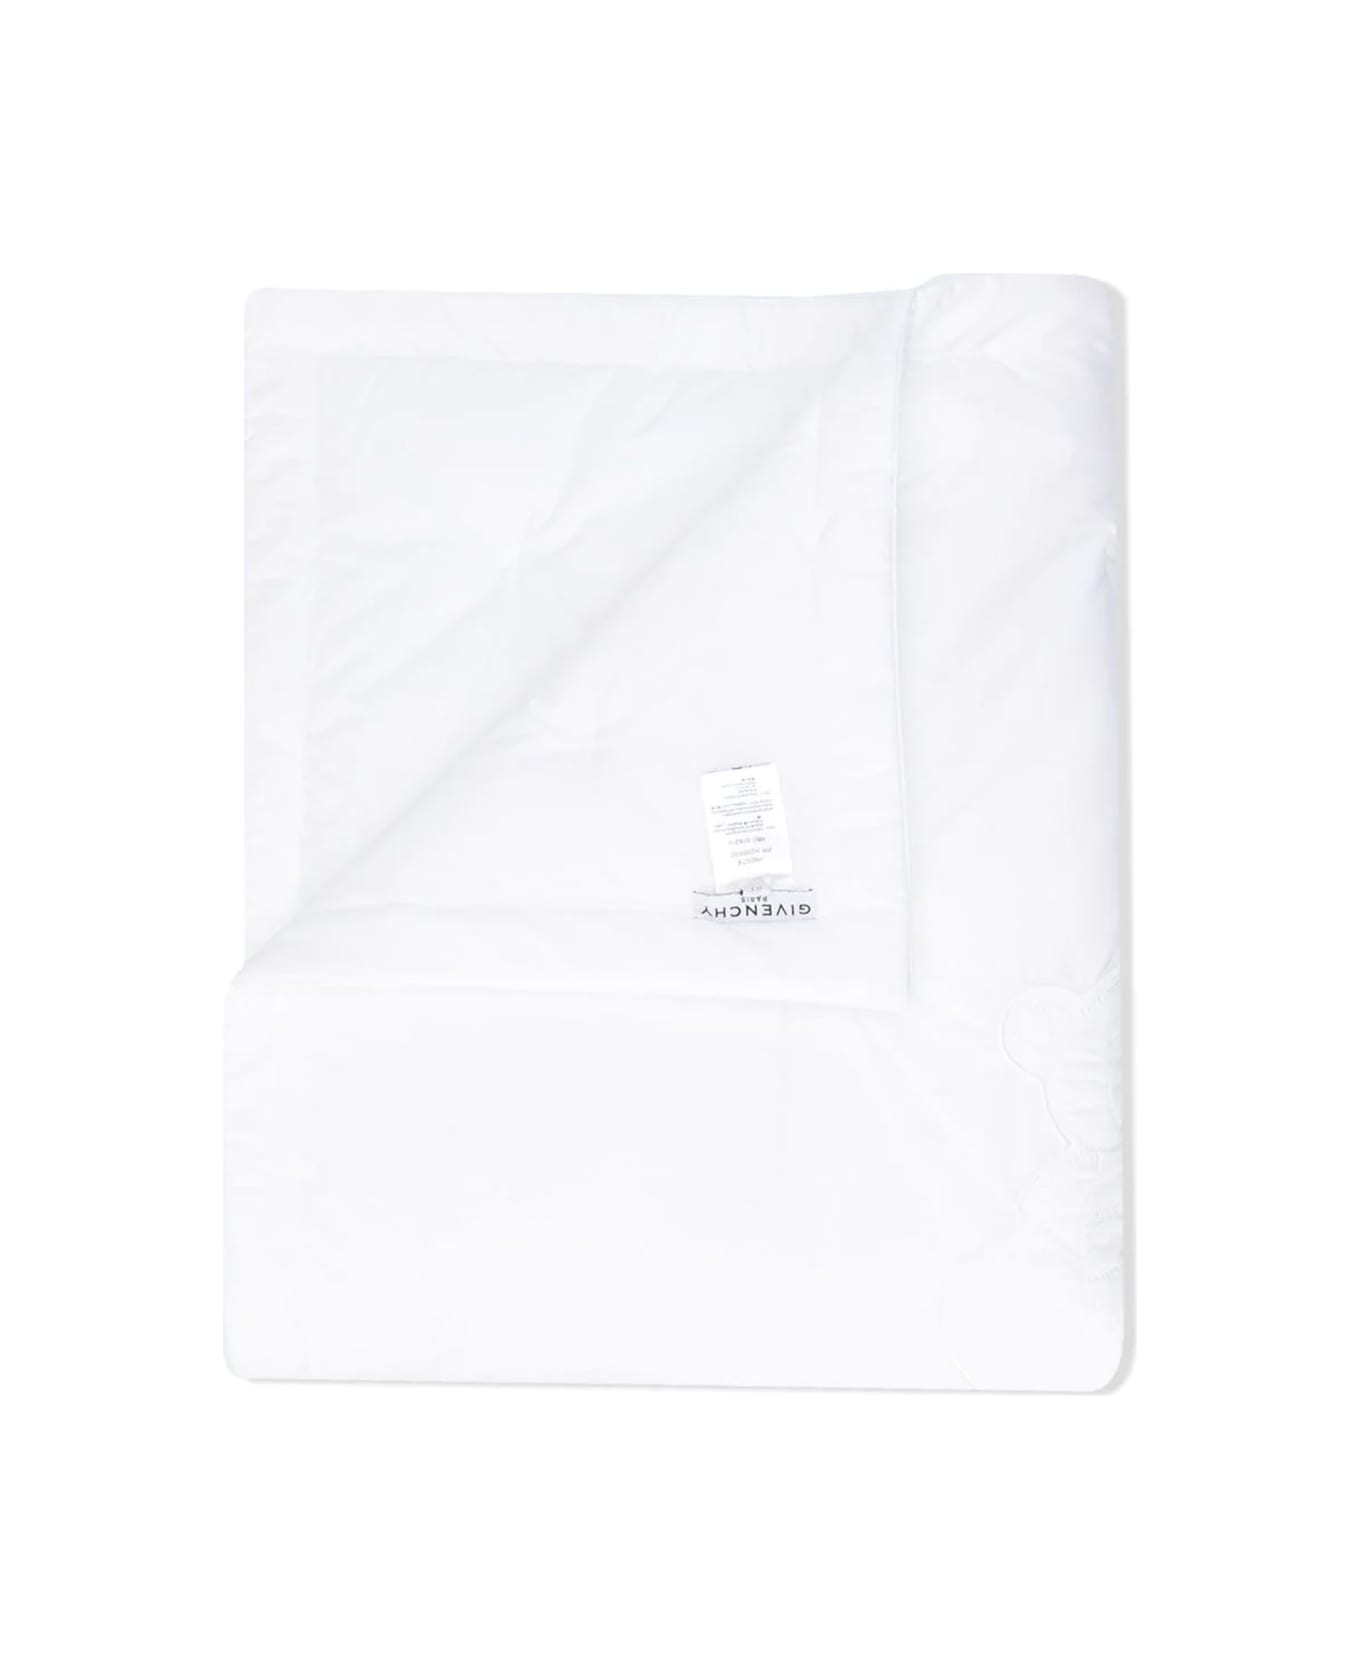 Givenchy Cotton Blanket - White アクセサリー＆ギフト